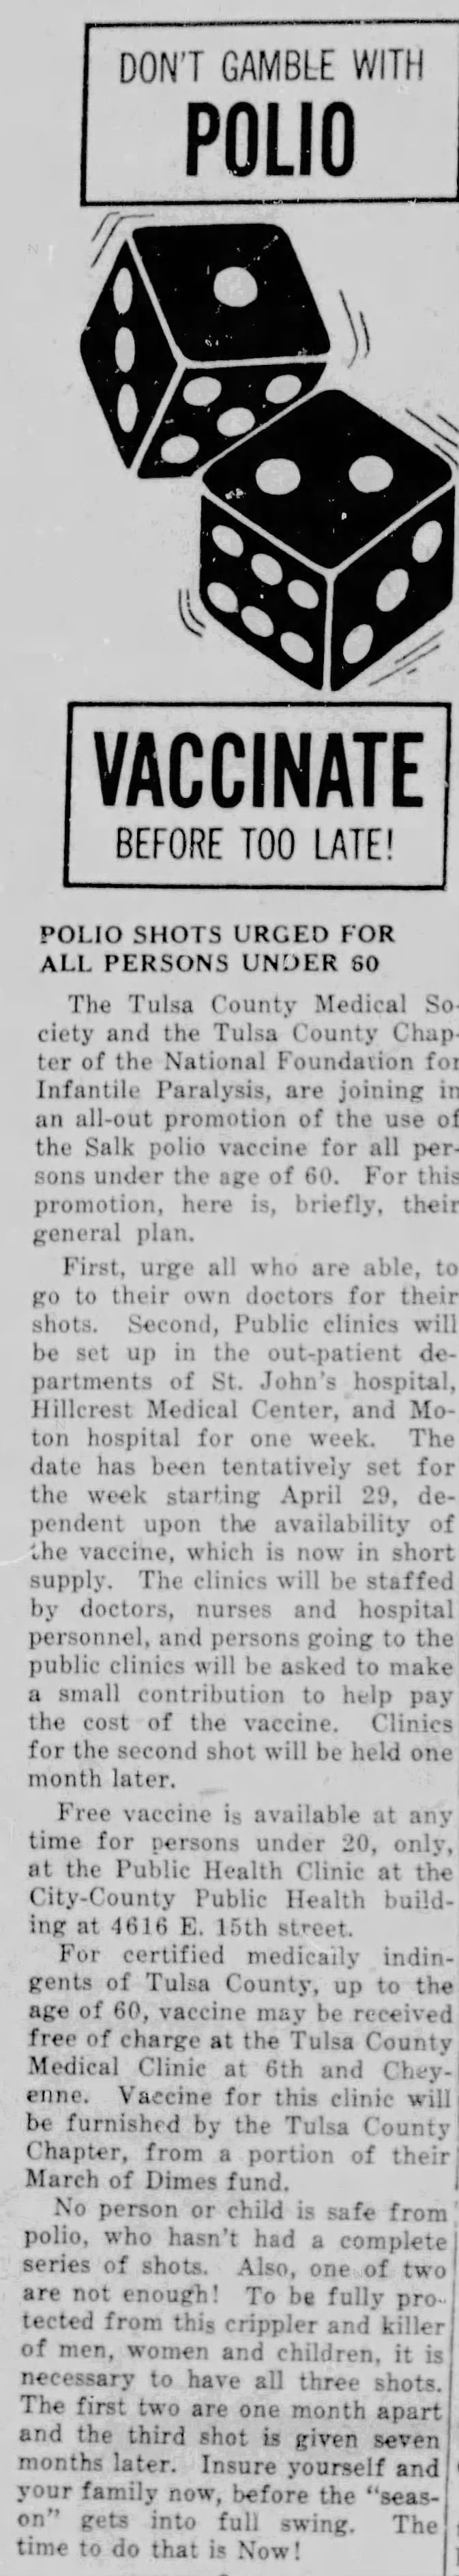 Tulsa County residents urged to get the  Salk vaccine (a series of three shots) for polio.